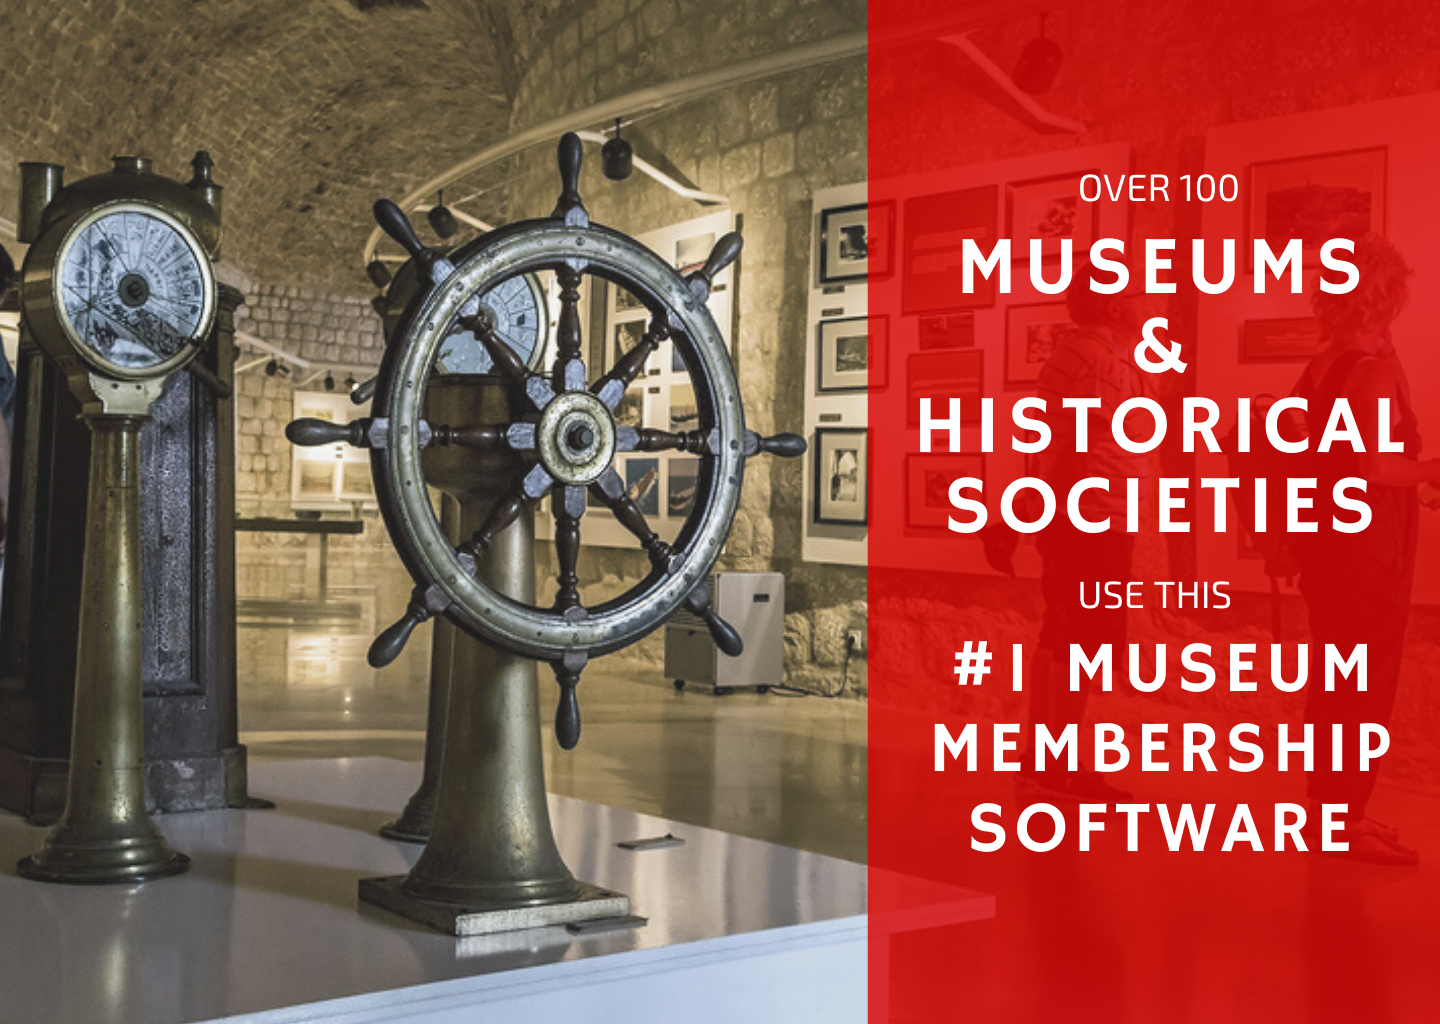 Over 100 Museums Use This #1 Museum Membership Software